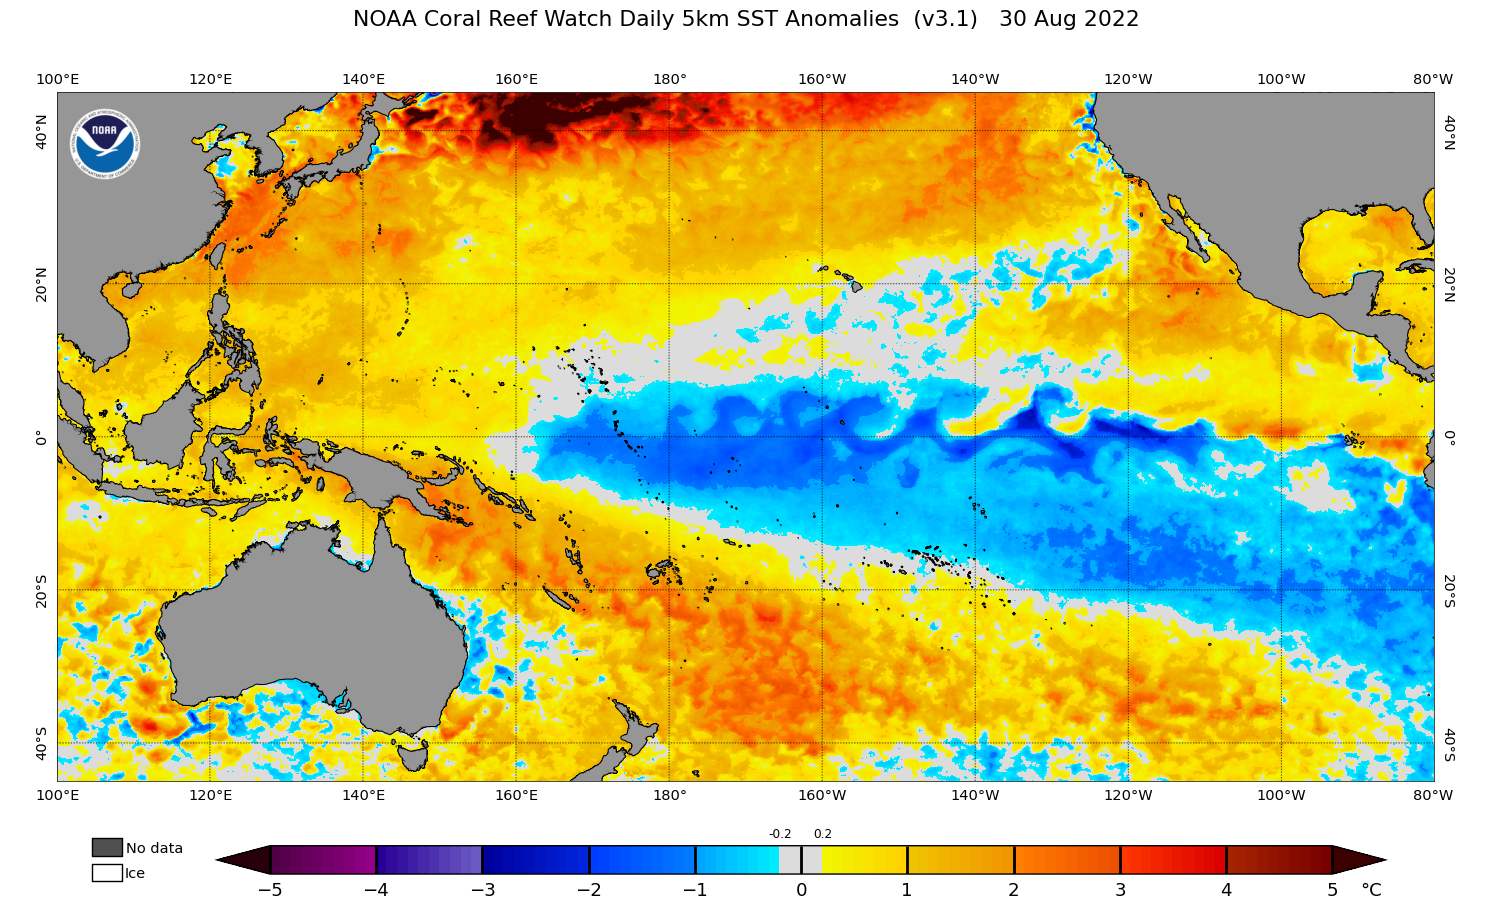 2022 Aug 30 SST Anomaly map for the Pacific Ocean